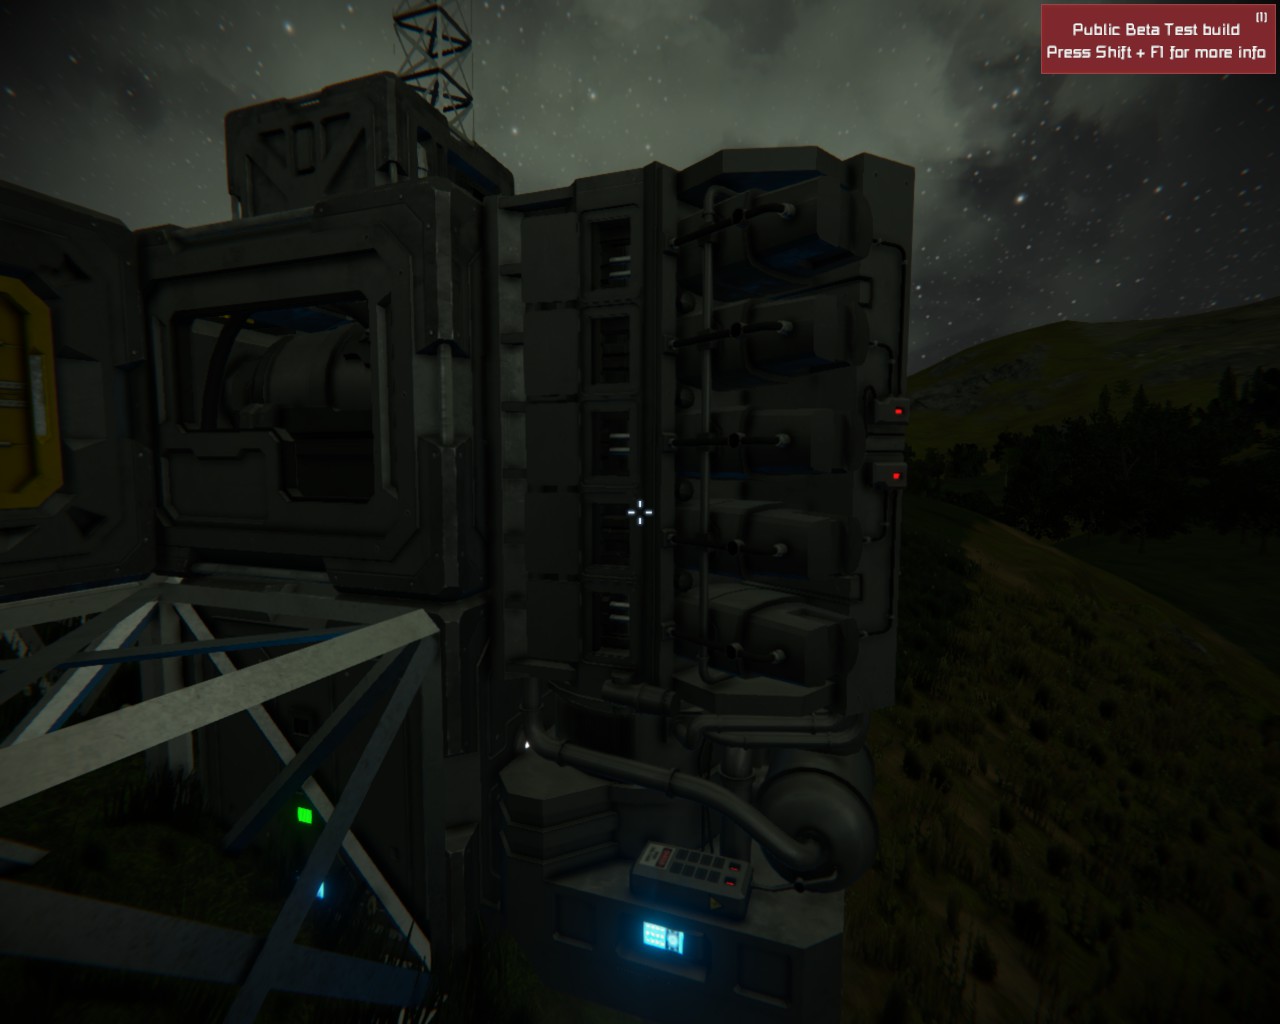 Hydrogen Engine not using (Powered) h2/o2 generator fullfill itself and produce power | Space Engineers Public Test - Optimizations